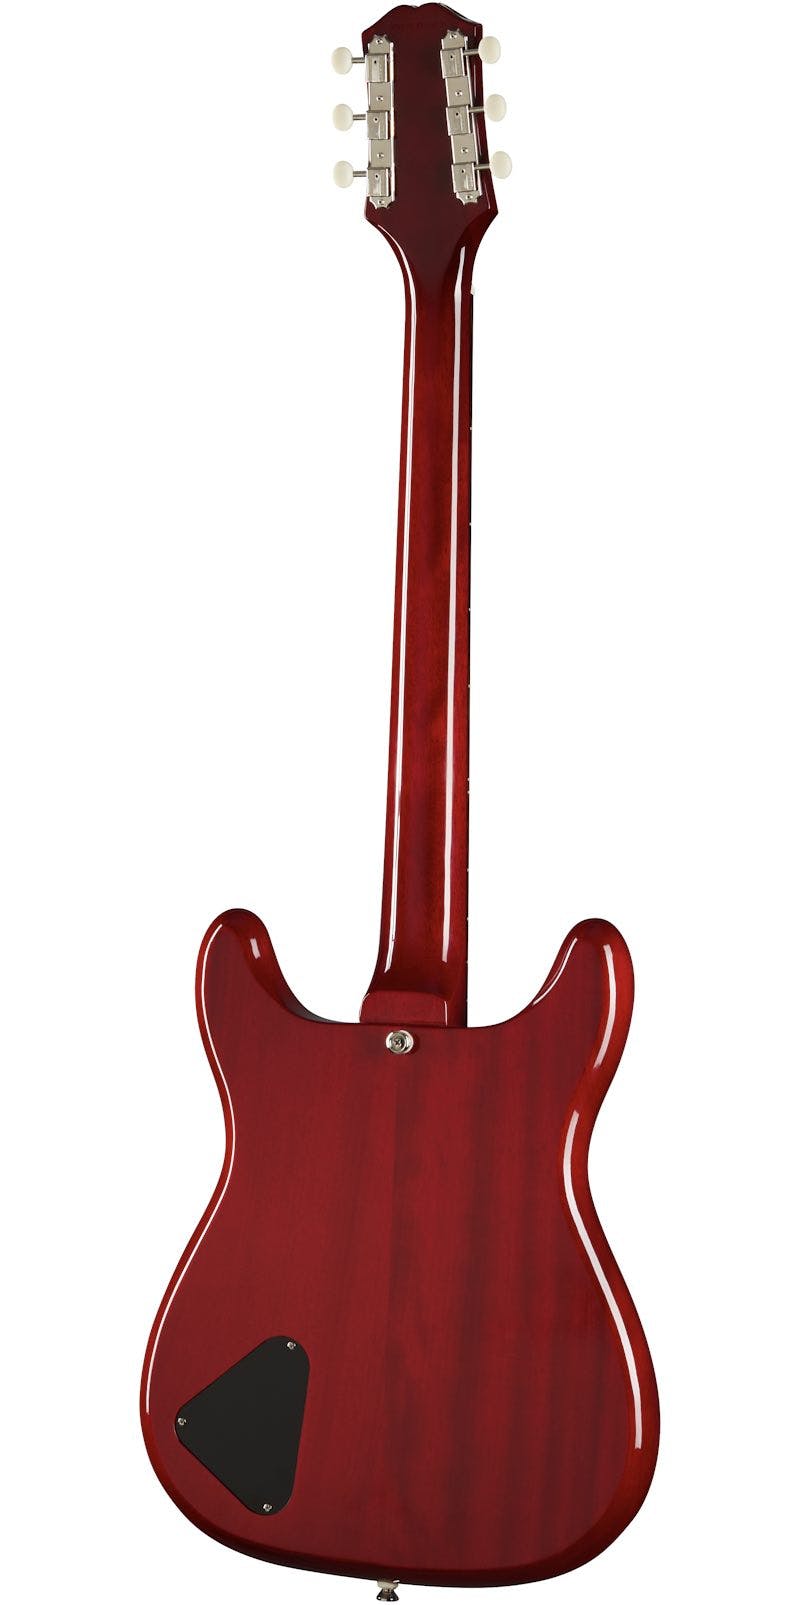 Epiphone Coronet Electric Guitar in Cherry - Andertons Music Co.